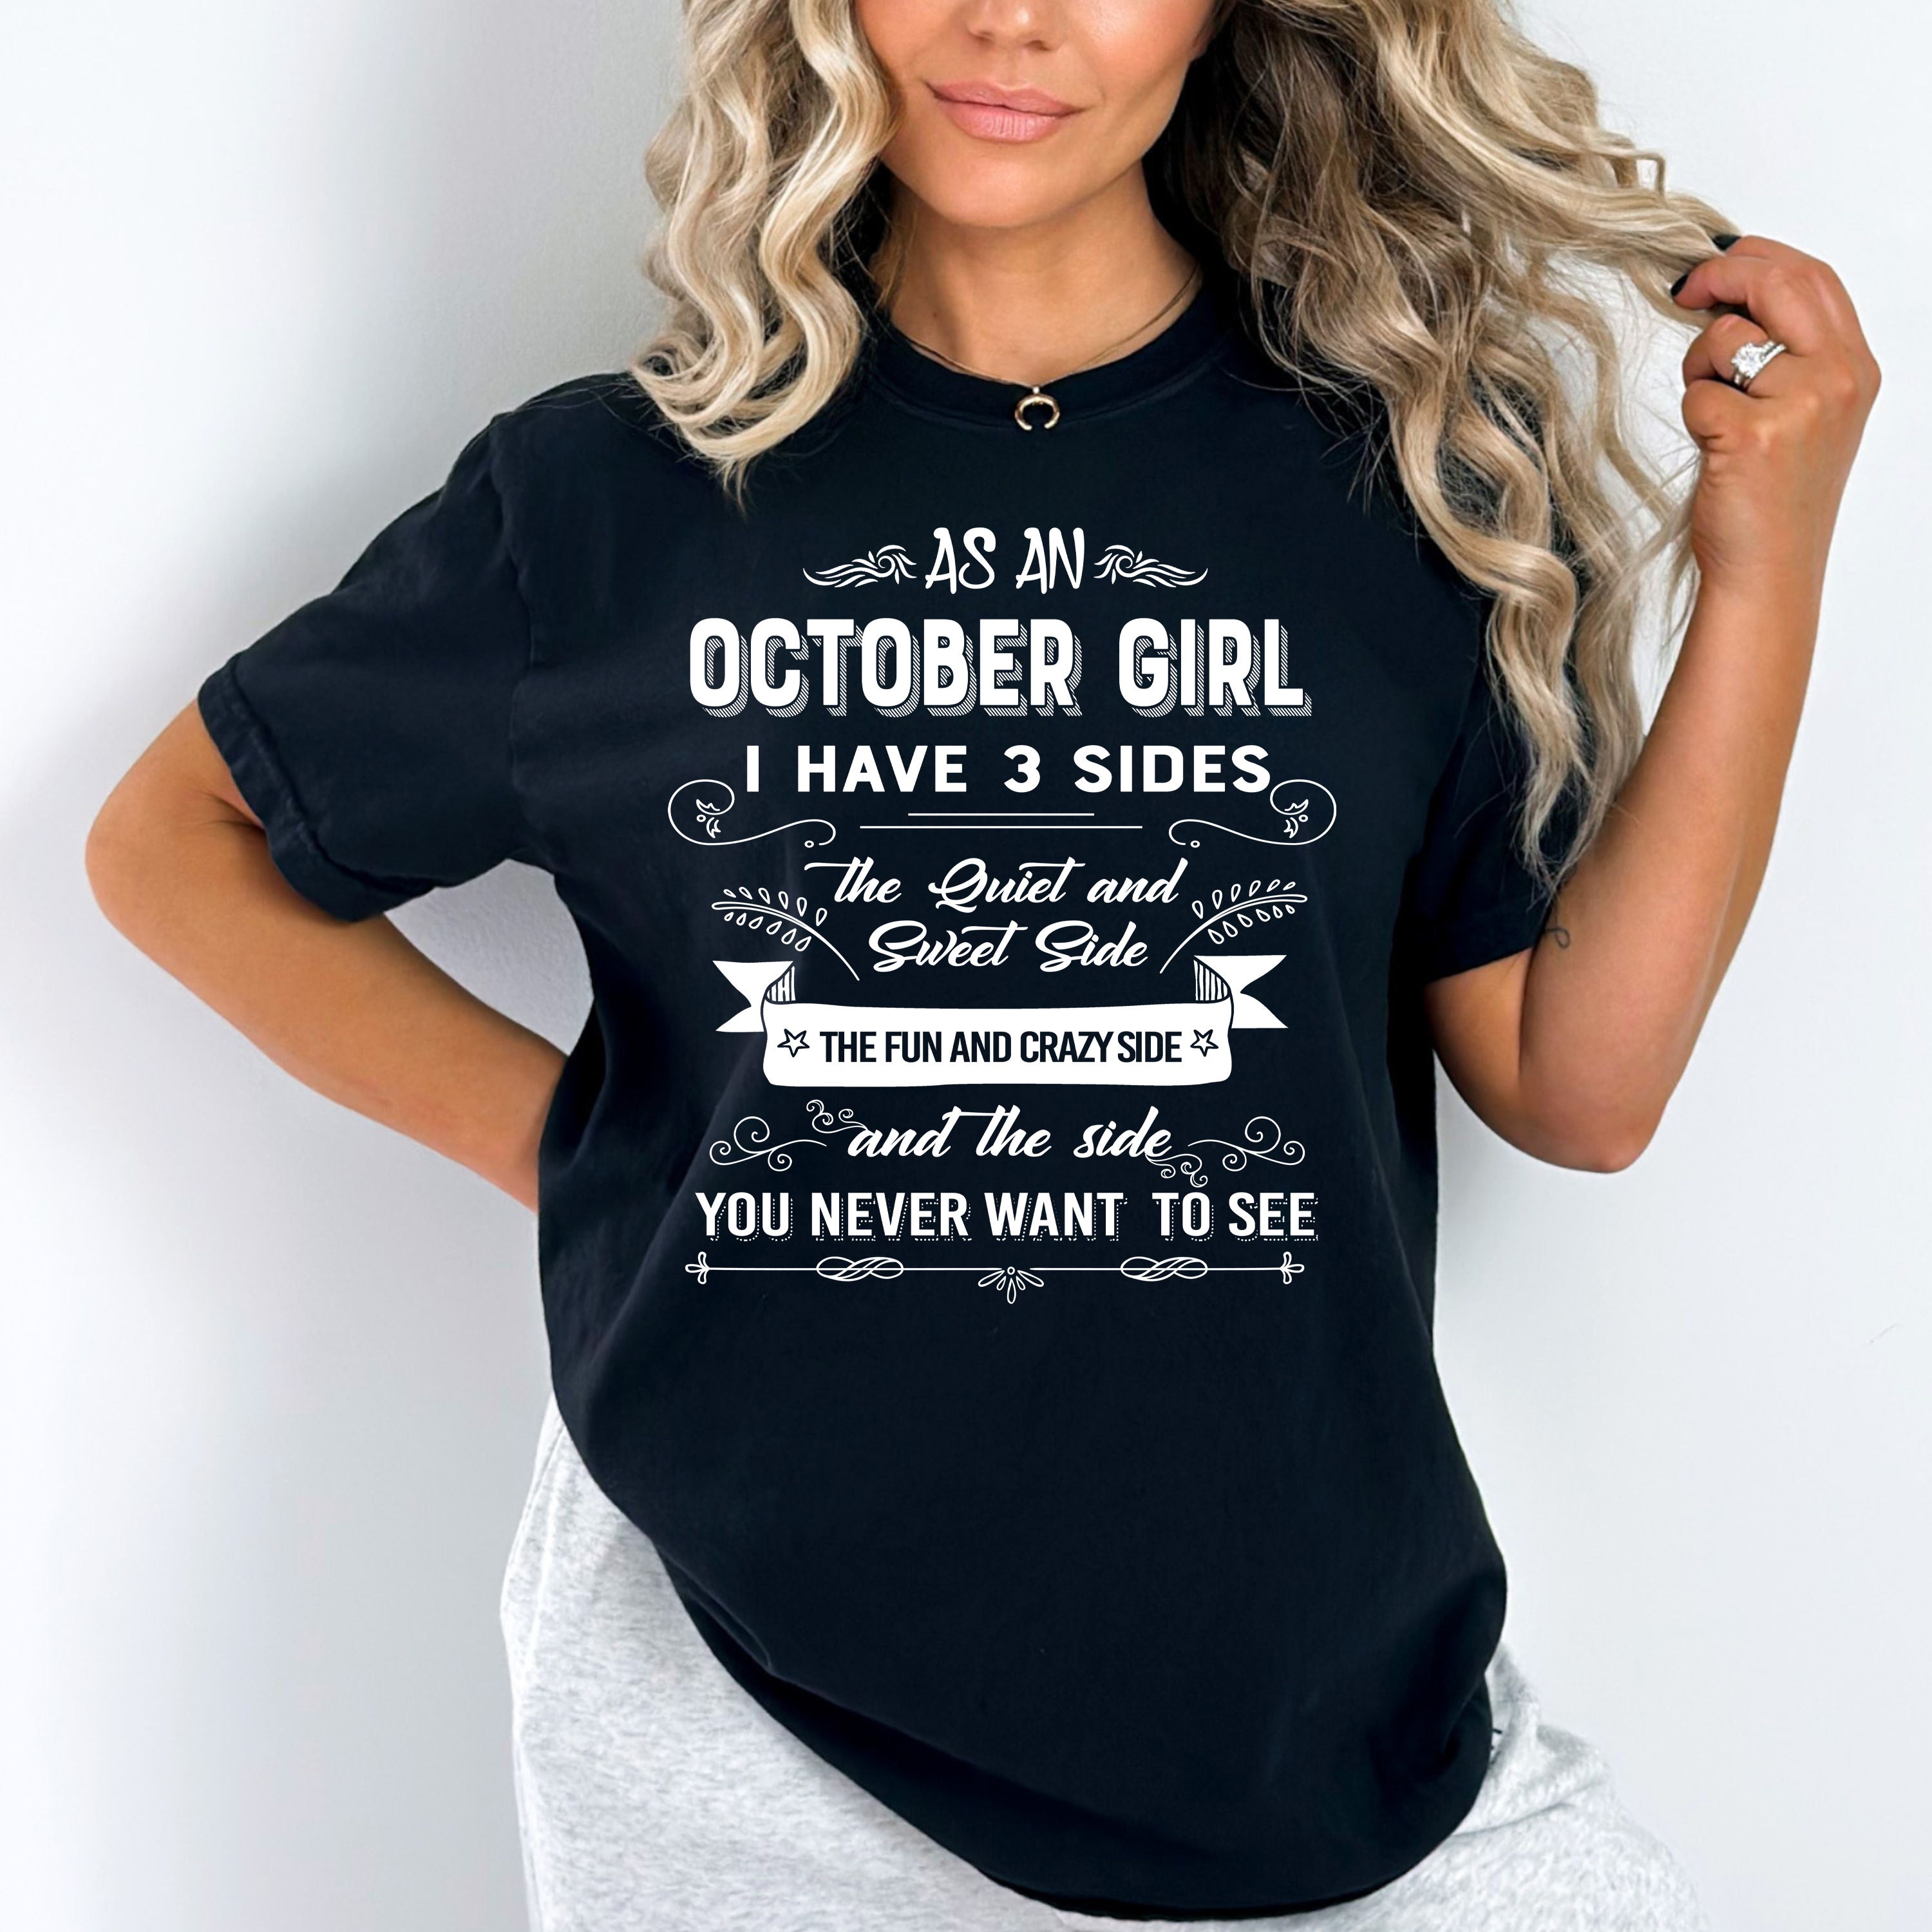 "As an October Girl I have 3 Sides" Grab All Colors for Discount.